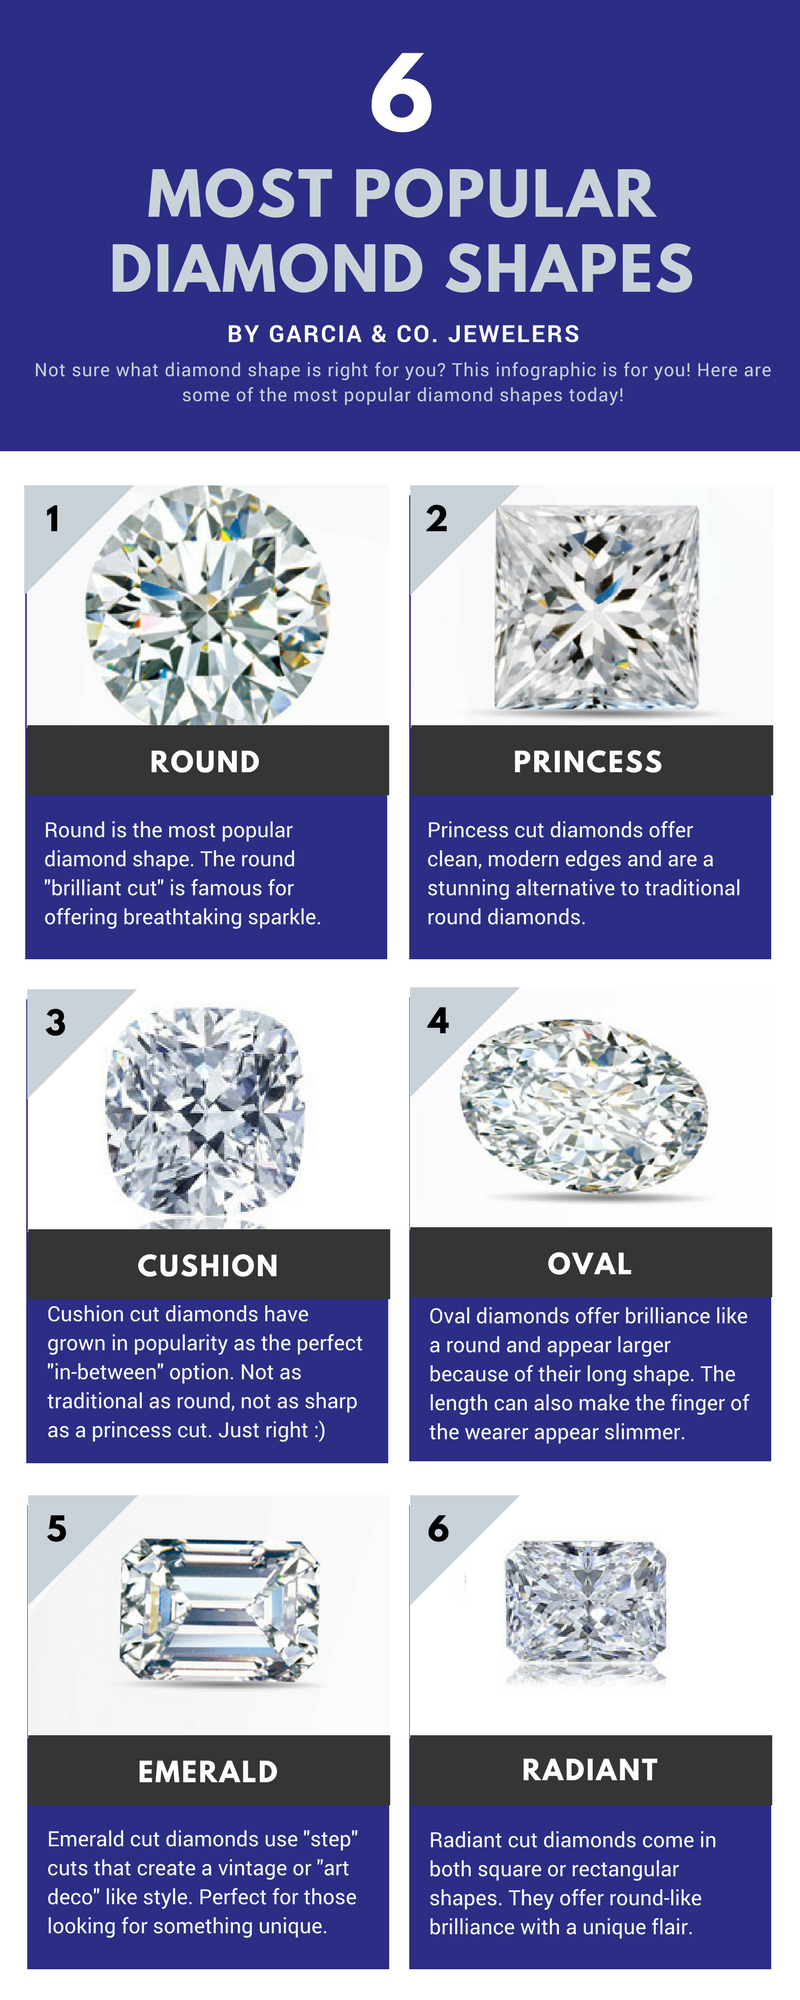 Different Diamond Shapes: 3 Tips For Choosing The Right Diamond Shape